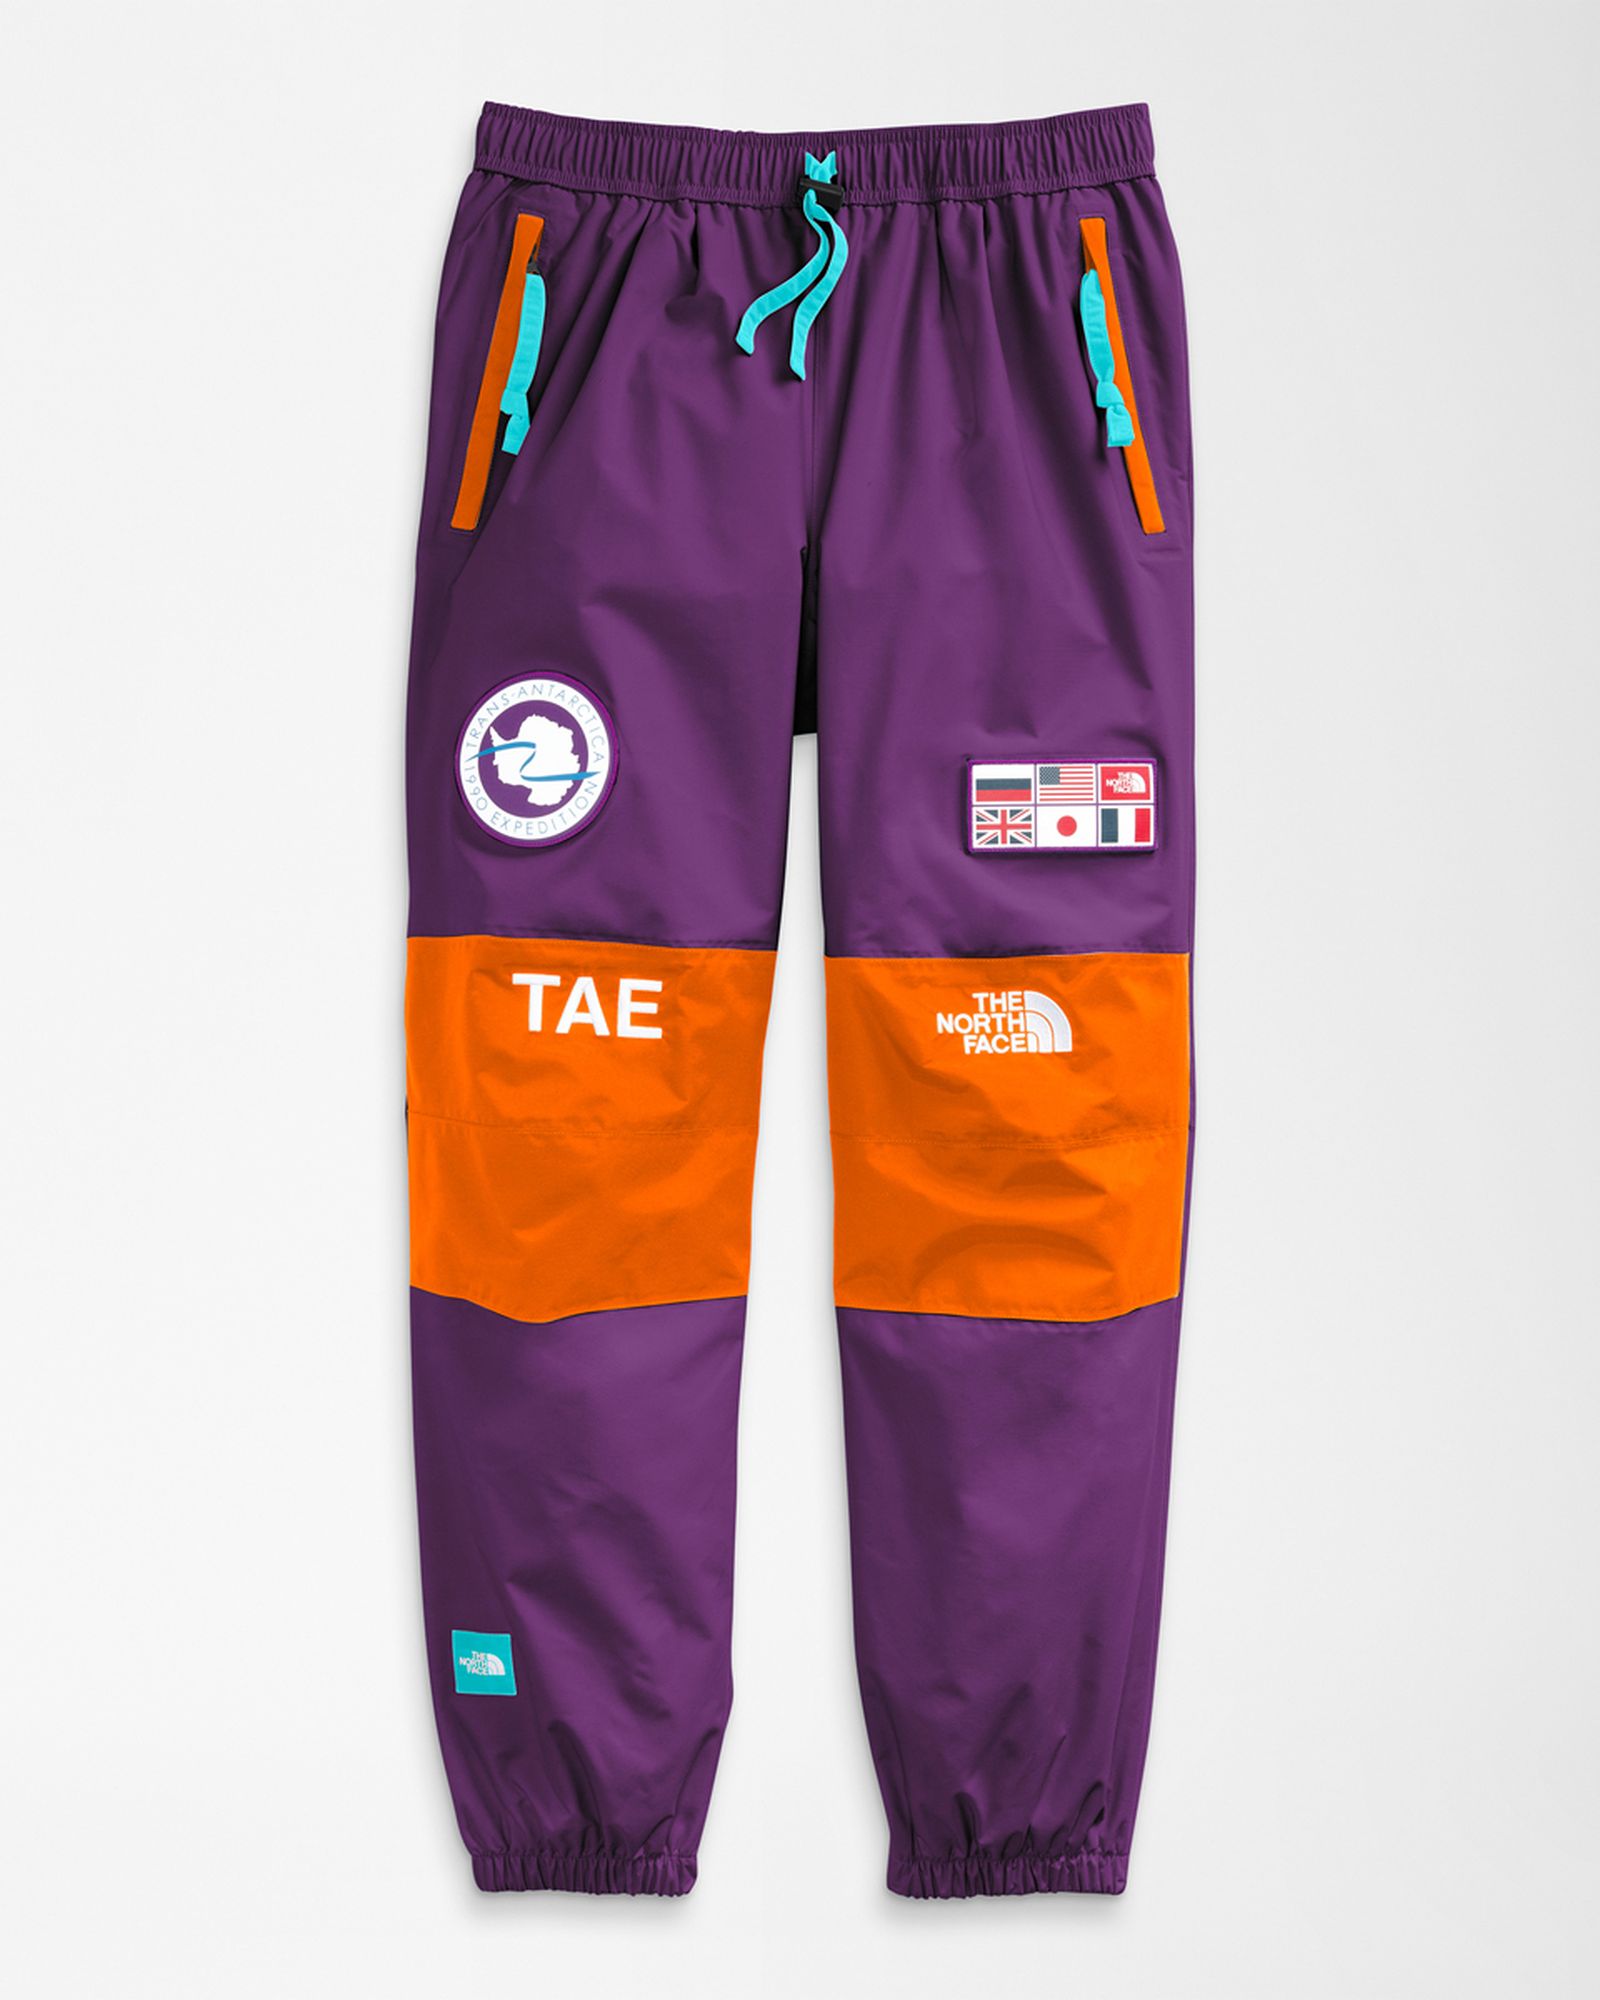 the-north-face-trans-antarctica-collection (18)